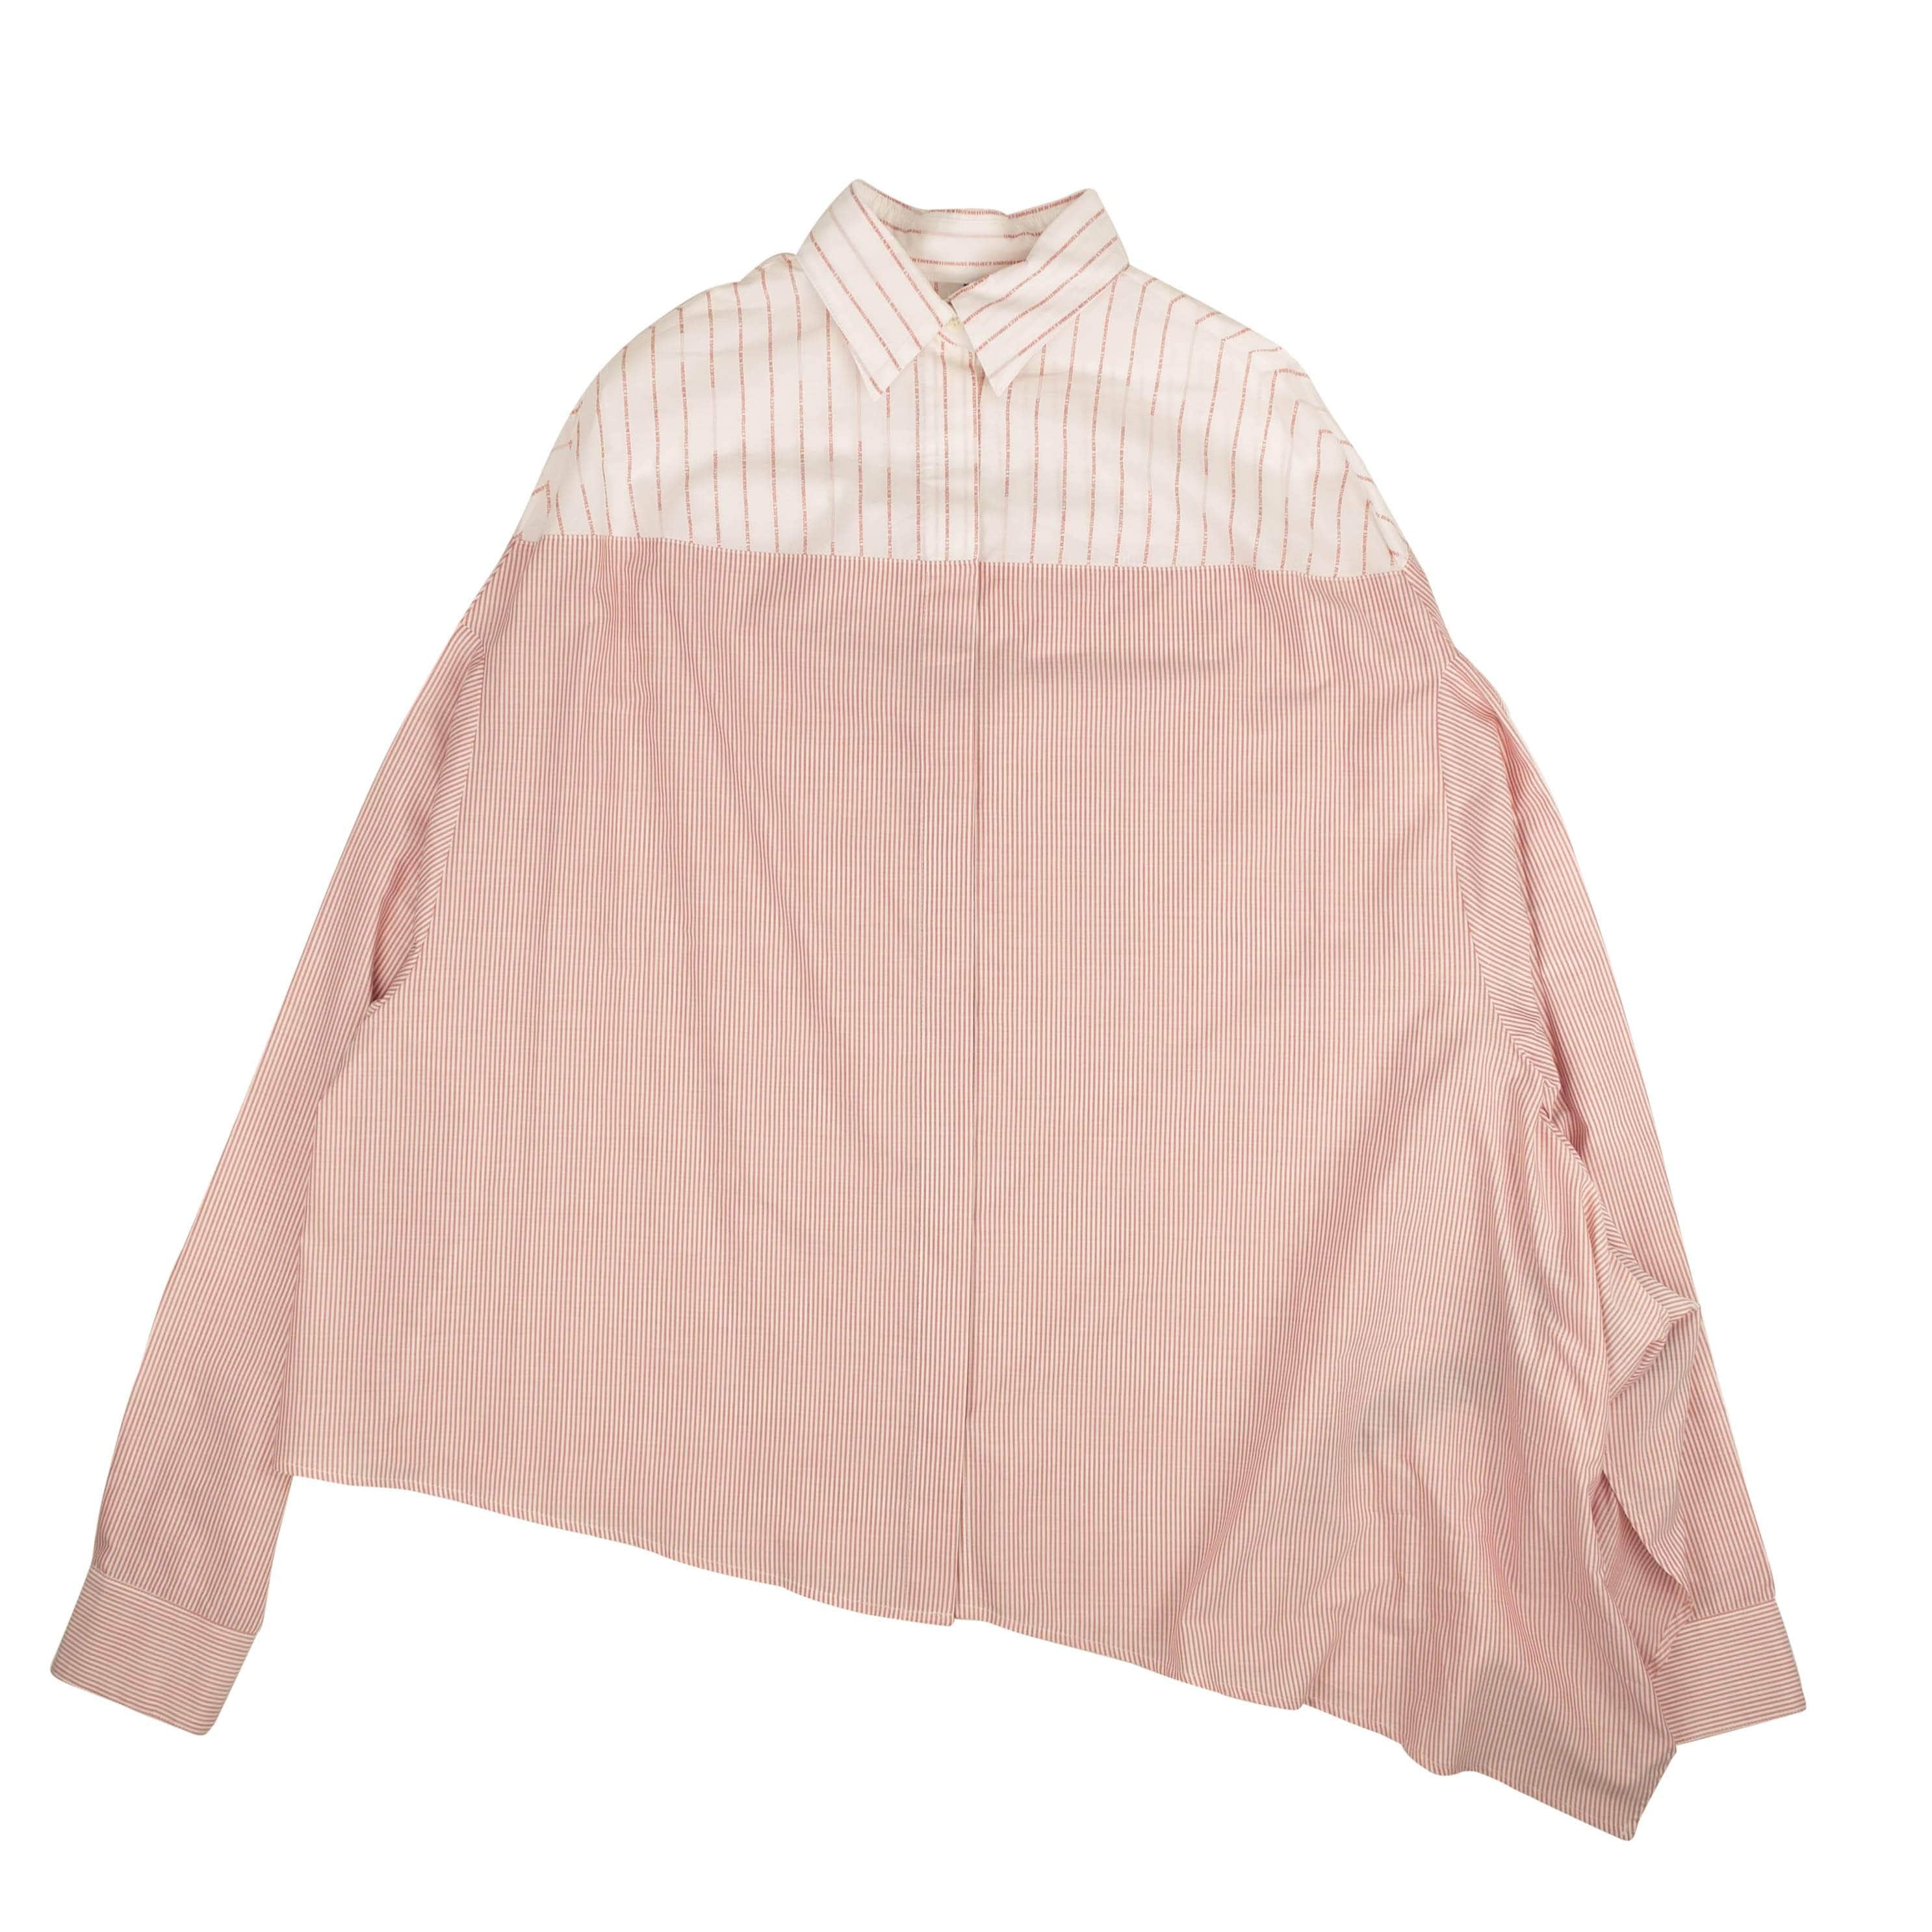 Unravel Project channelenable-all, chicmi, couponcollection, gender-womens, main-clothing, size-36, size-38, size-40, size-42, under-250, unravel-project, womens-blouses Pink Assymetric Logo Stripe Shirt Dress